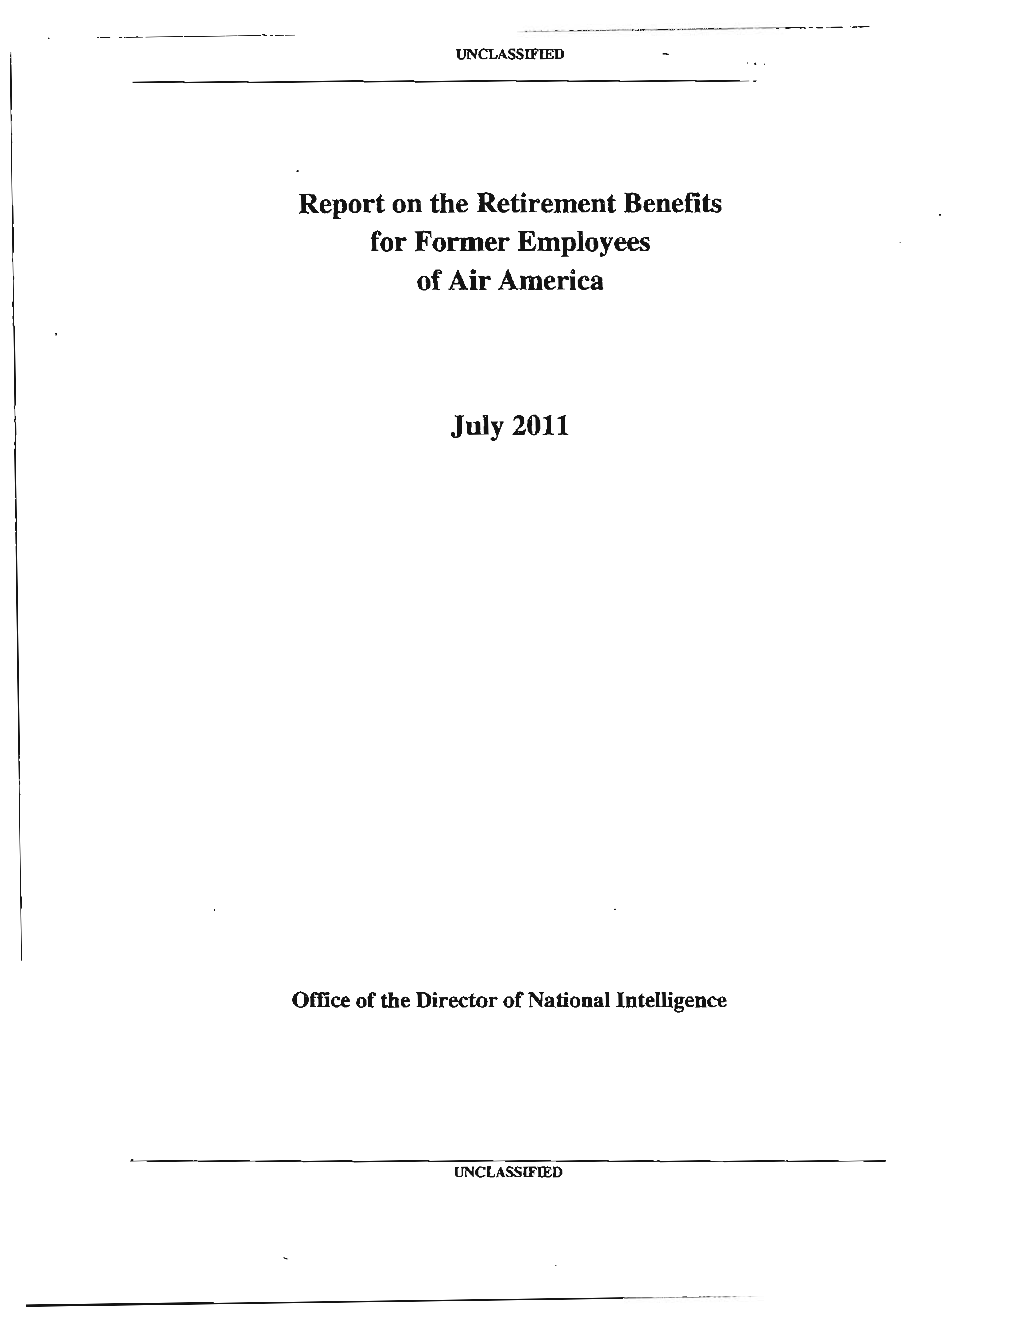 Report on the Retirement Benefits for Former Employees of Air America